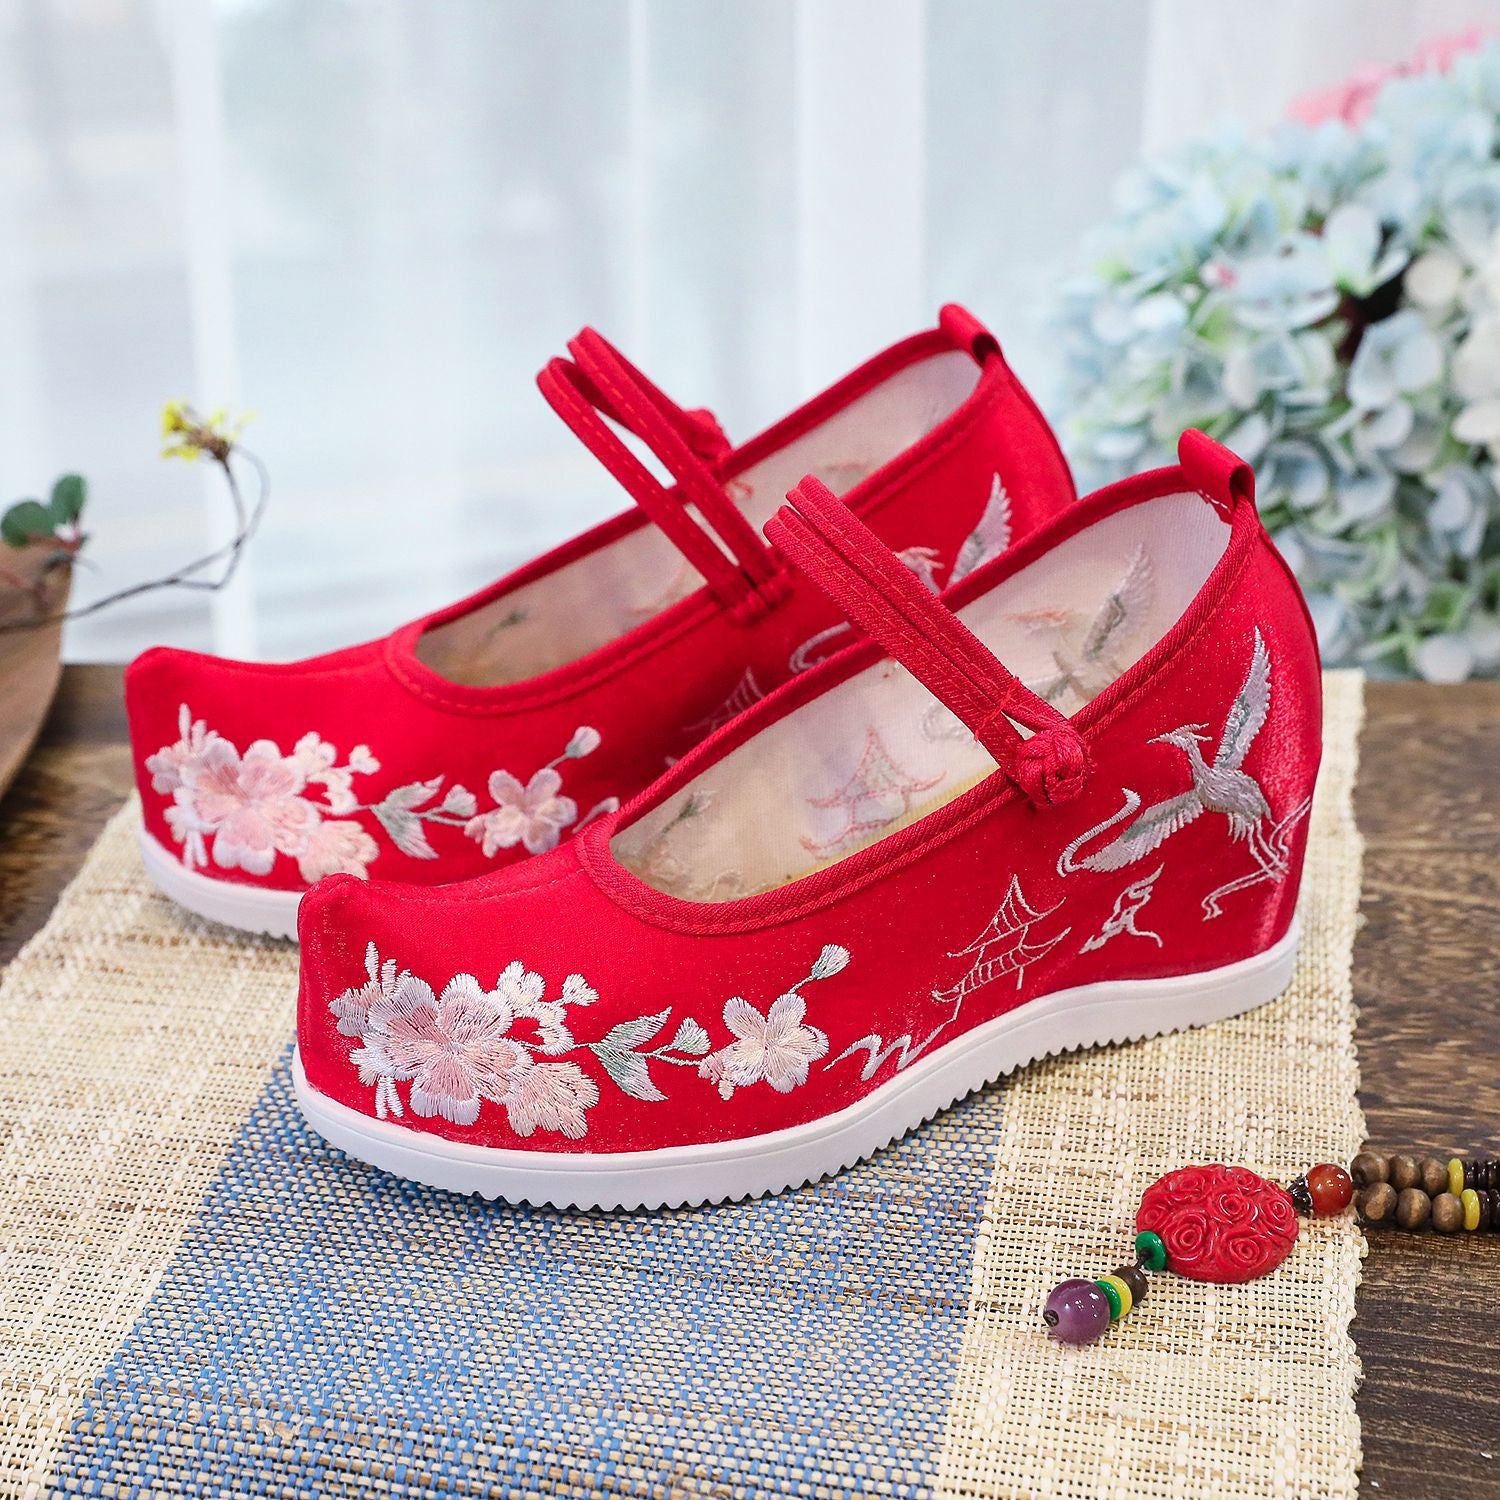 7cm Antique For Chinese Clothing Warped Head Bow Canvas Shoes